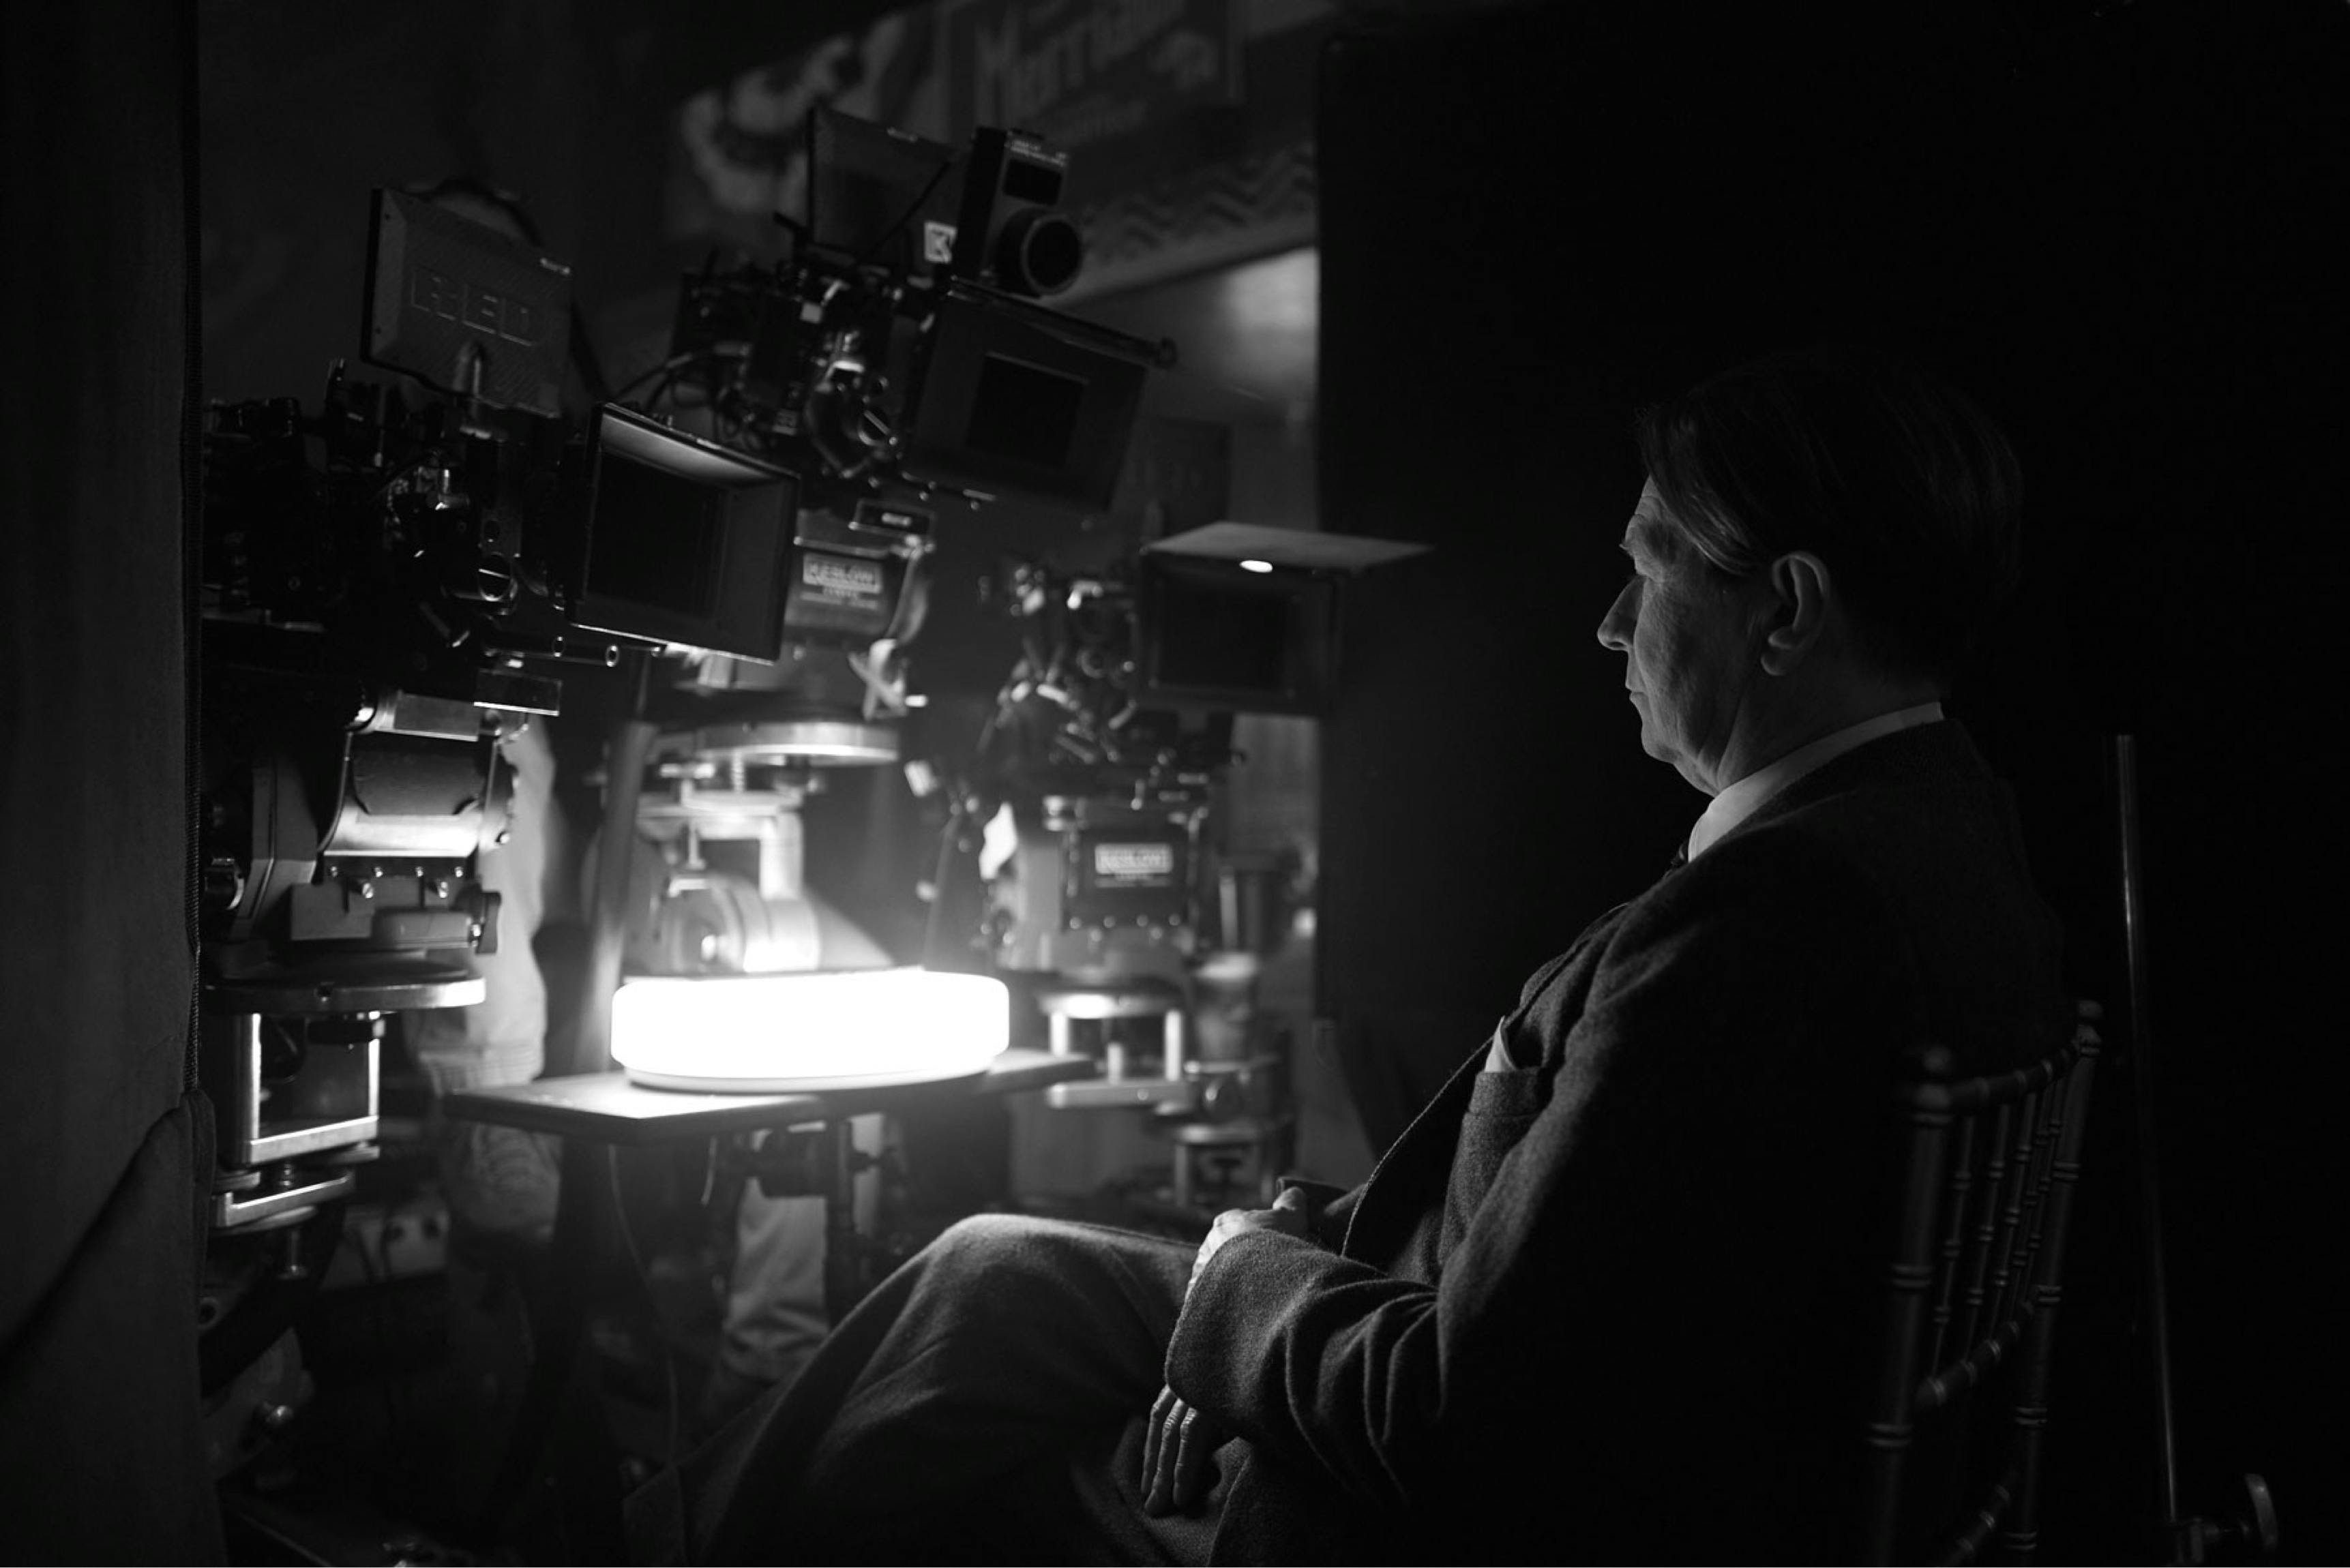 Gary Oldman in costume as Herman J. Mankiewicz sits behind a series of cameras on the set of Mank.